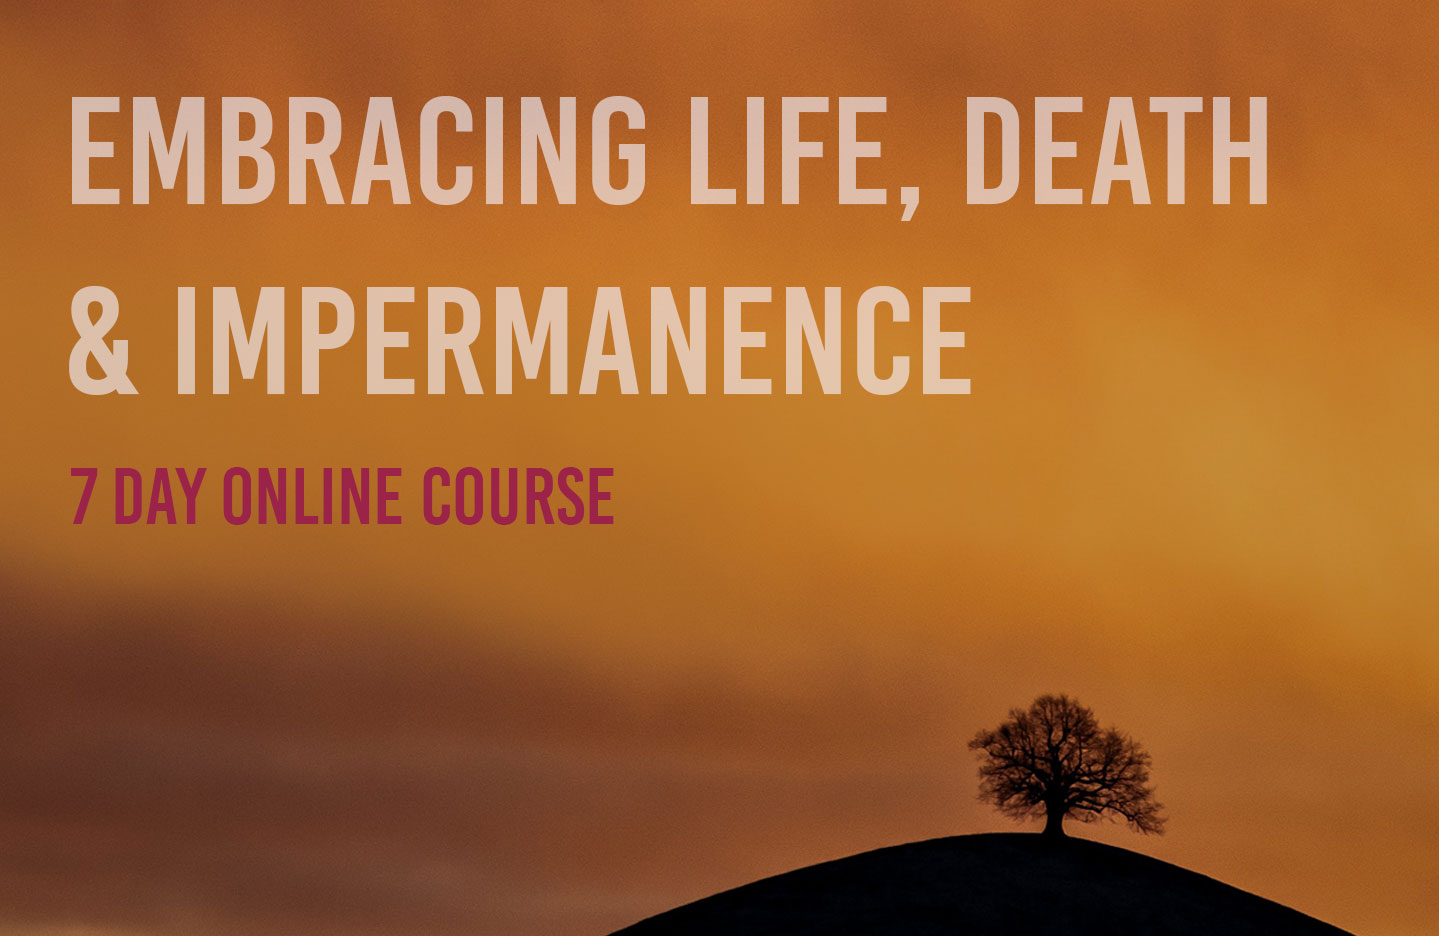 Online Course: Embracing life, death and impermanence